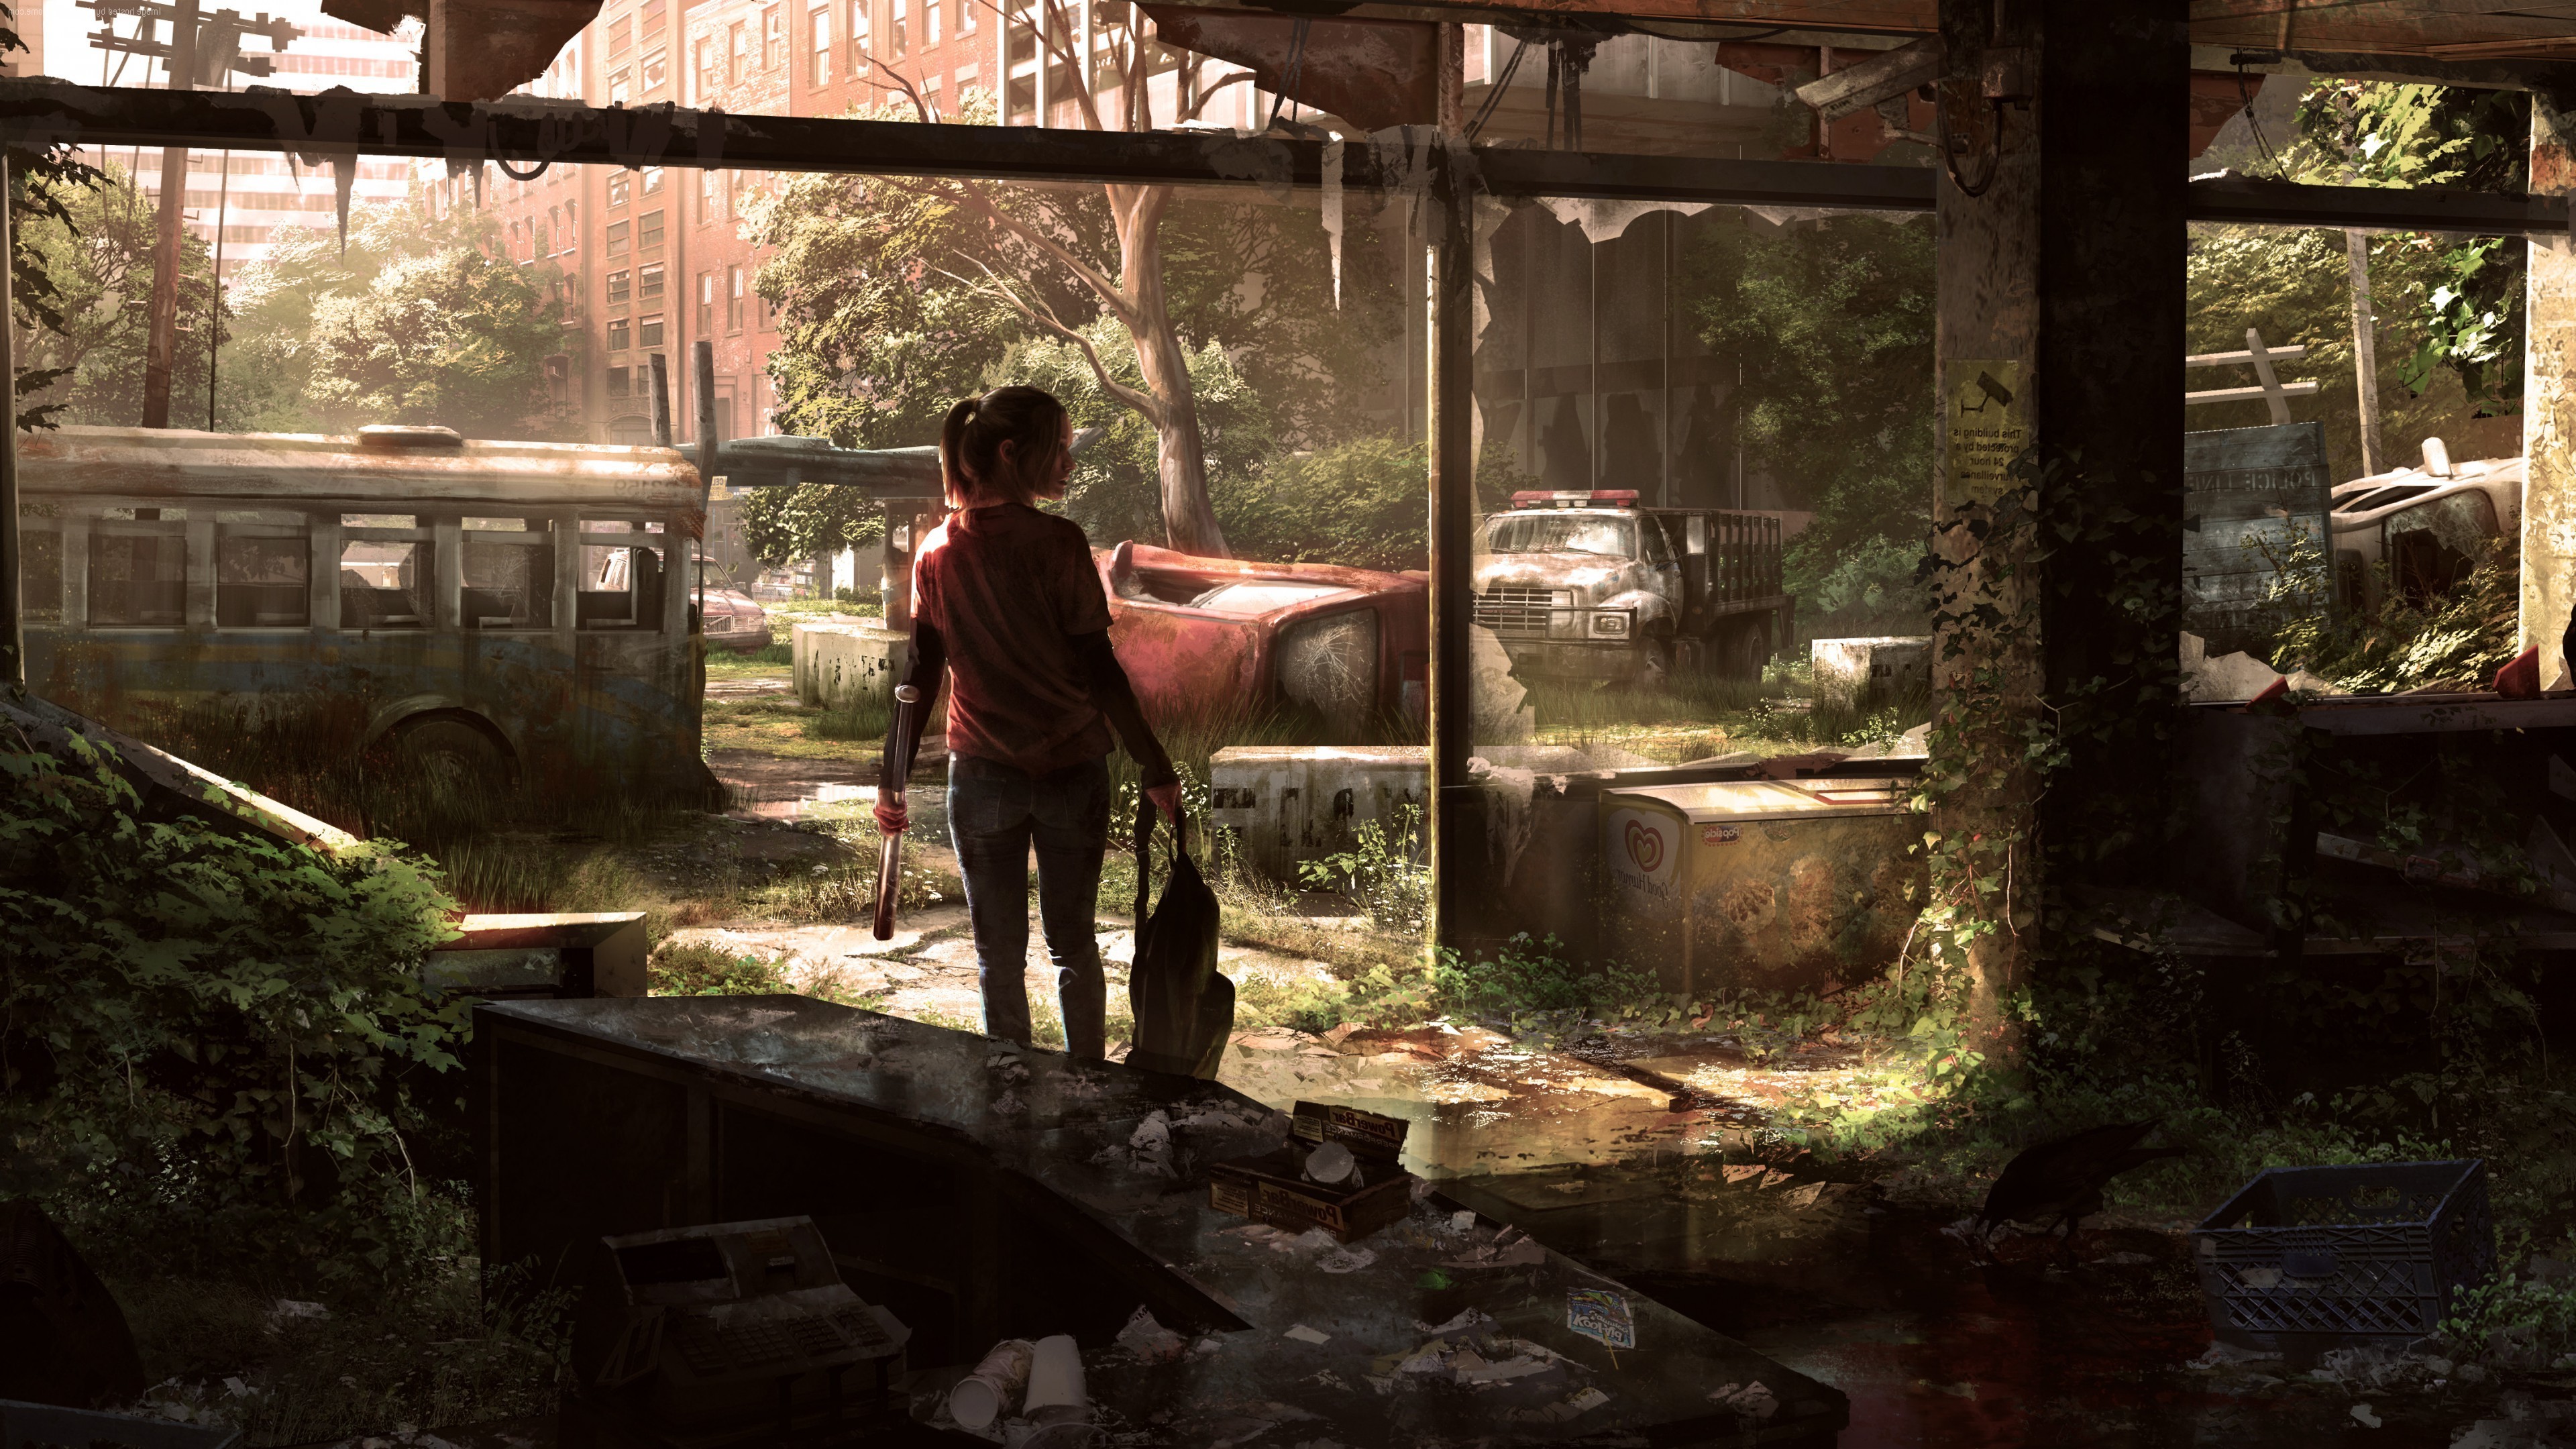 Wallpaper The Last Of Us Wallpapers